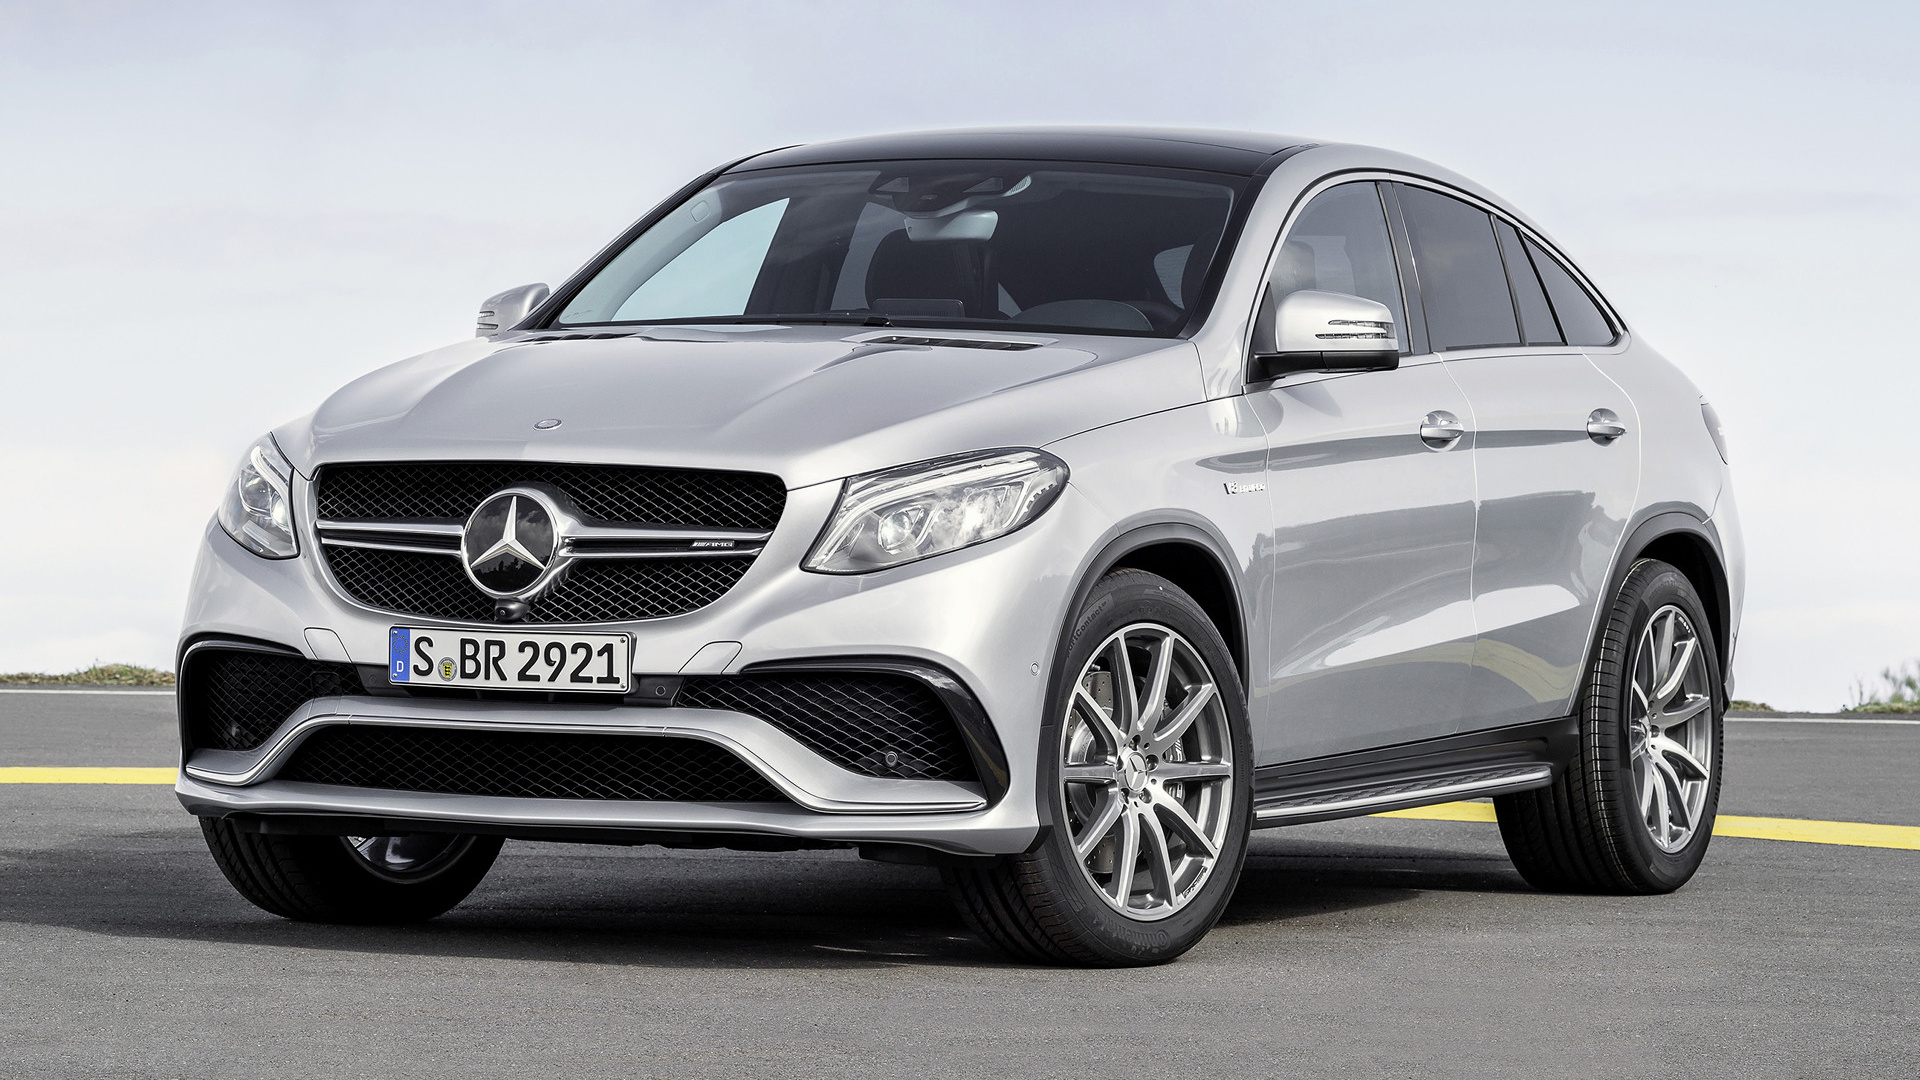 Mercedes-AMG GLE 63 Coupe (2015) Wallpapers and HD Images - Car Pixel